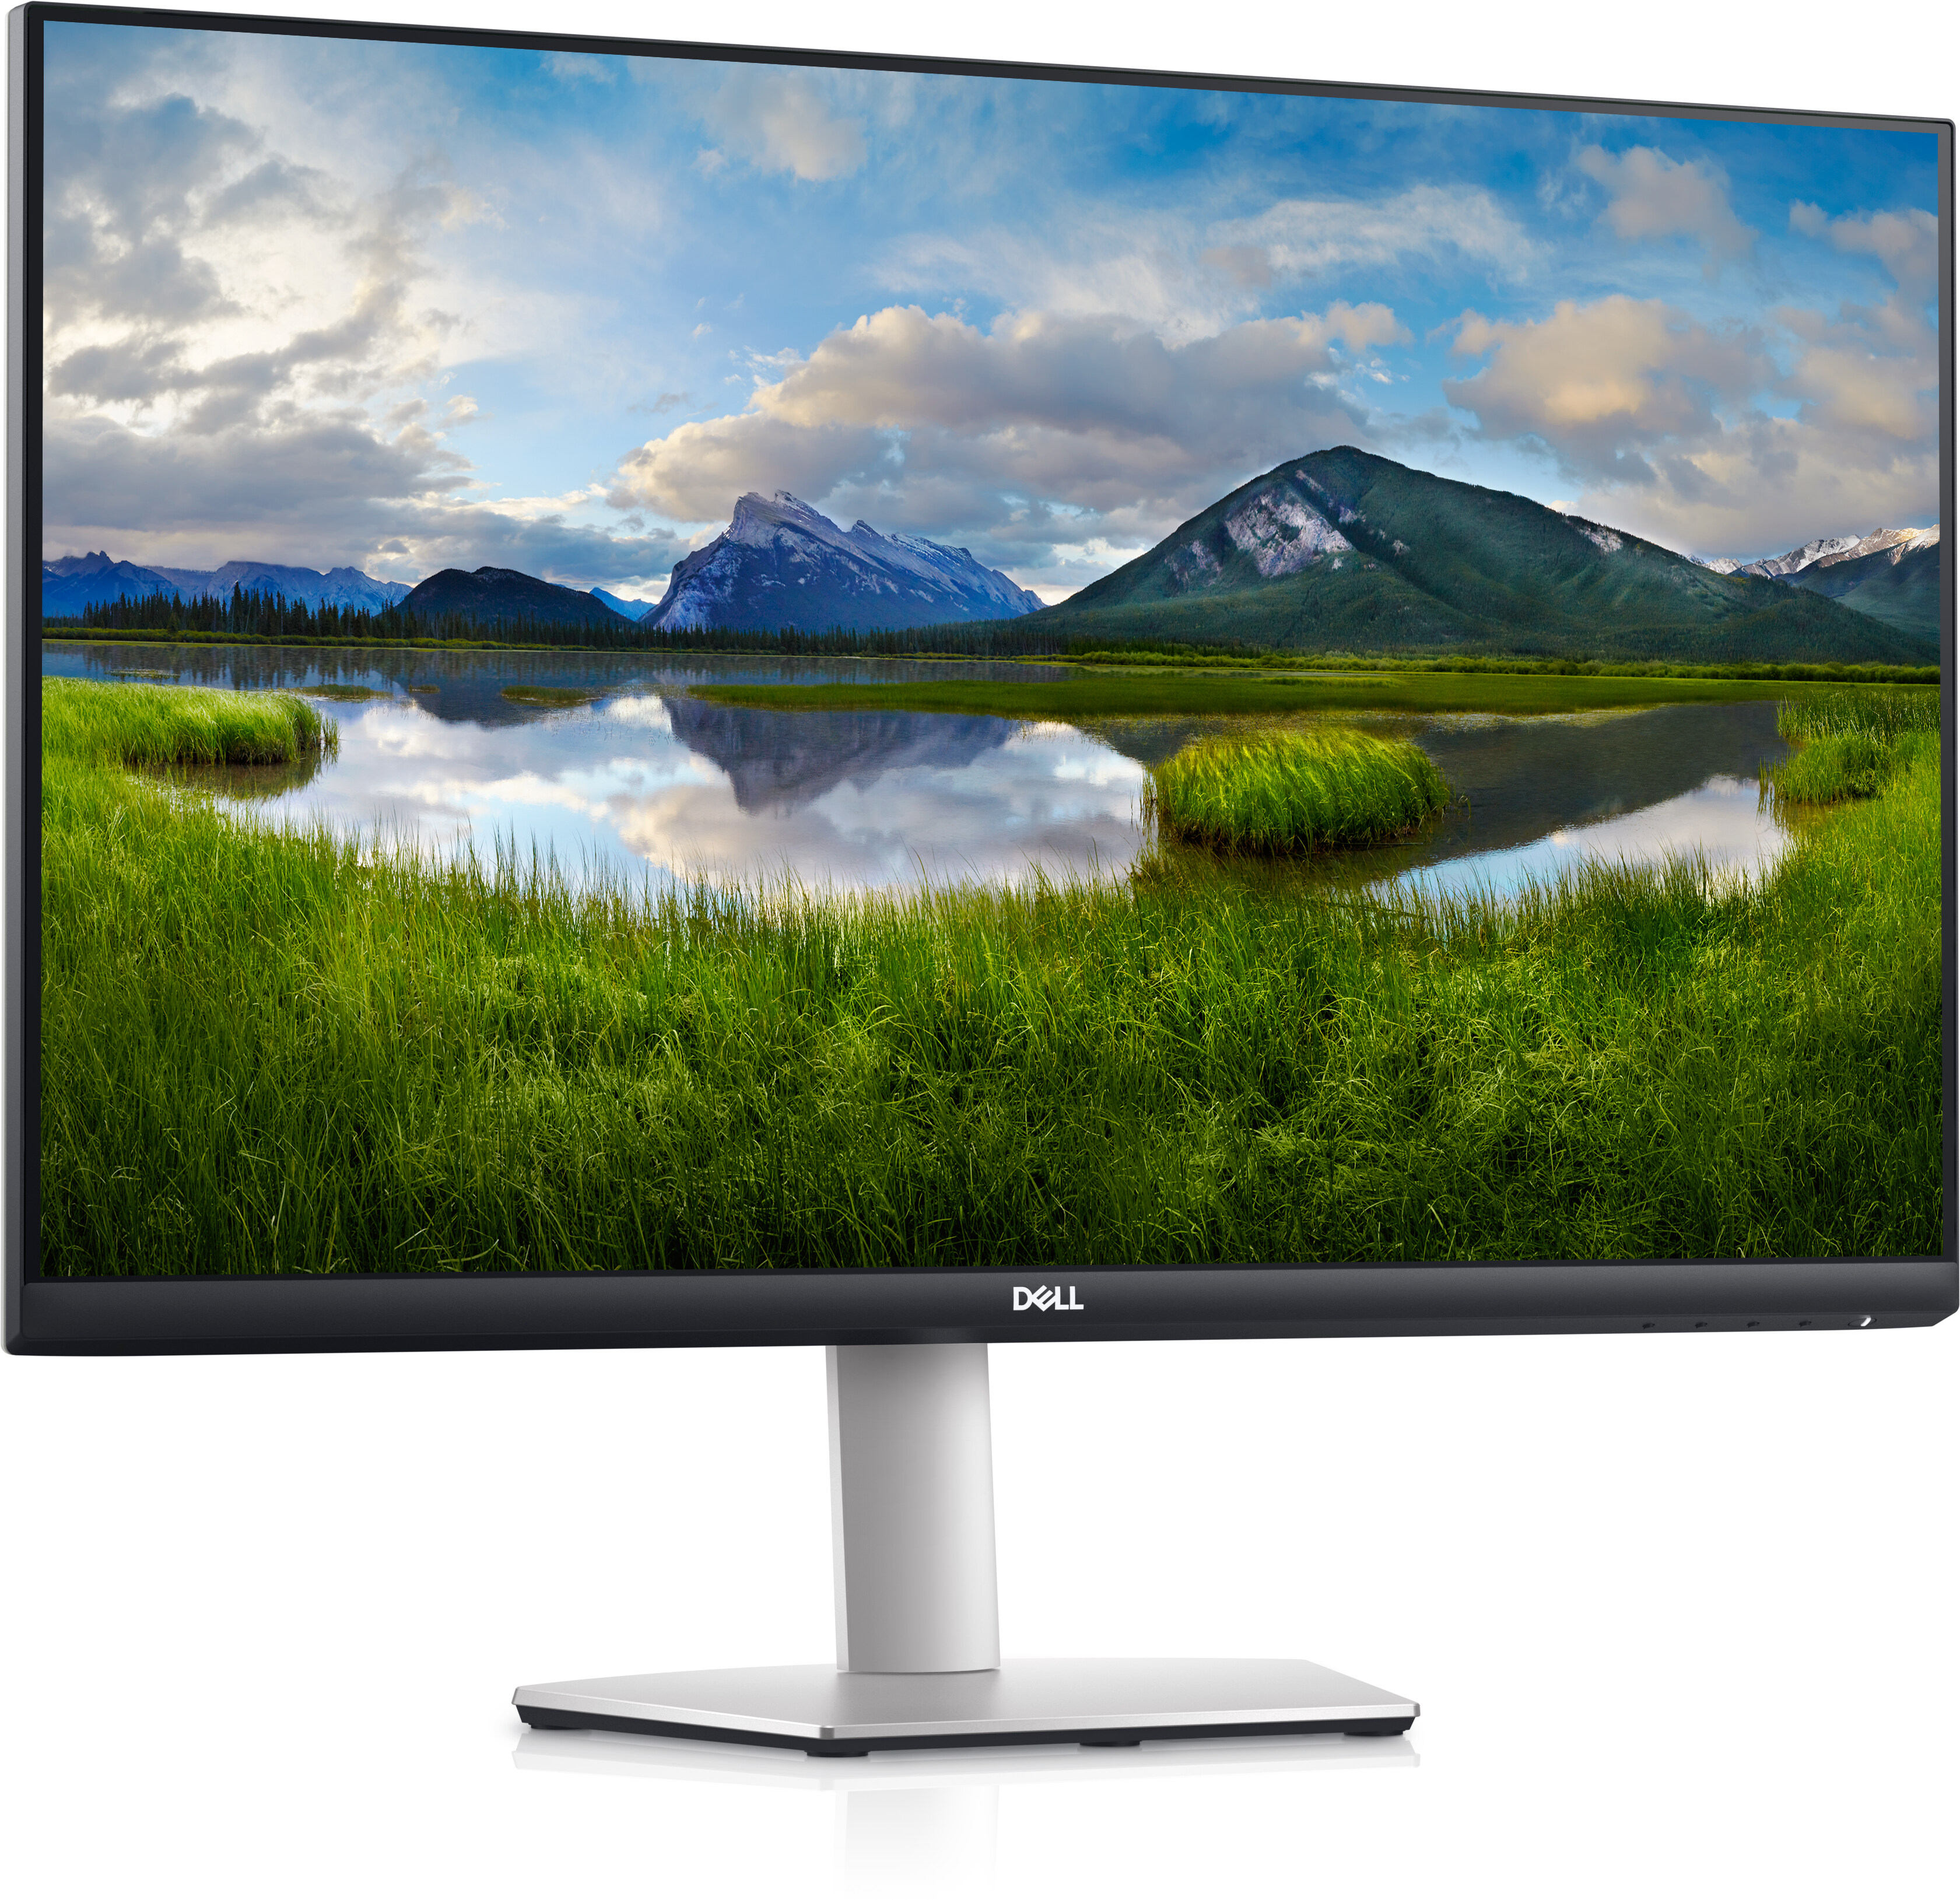 https://i.dell.com/is/image/DellContent/content/dam/ss2/product-images/peripherals/output-devices/dell/monitors/s-series/s2721qsa/media-gallery/s2721qsa-cfp-00025rf095-gy.psd?fmt=pjpg&pscan=auto&scl=1&wid=3361&hei=3258&qlt=100,1&resMode=sharp2&size=3361,3258&chrss=full&imwidth=5000